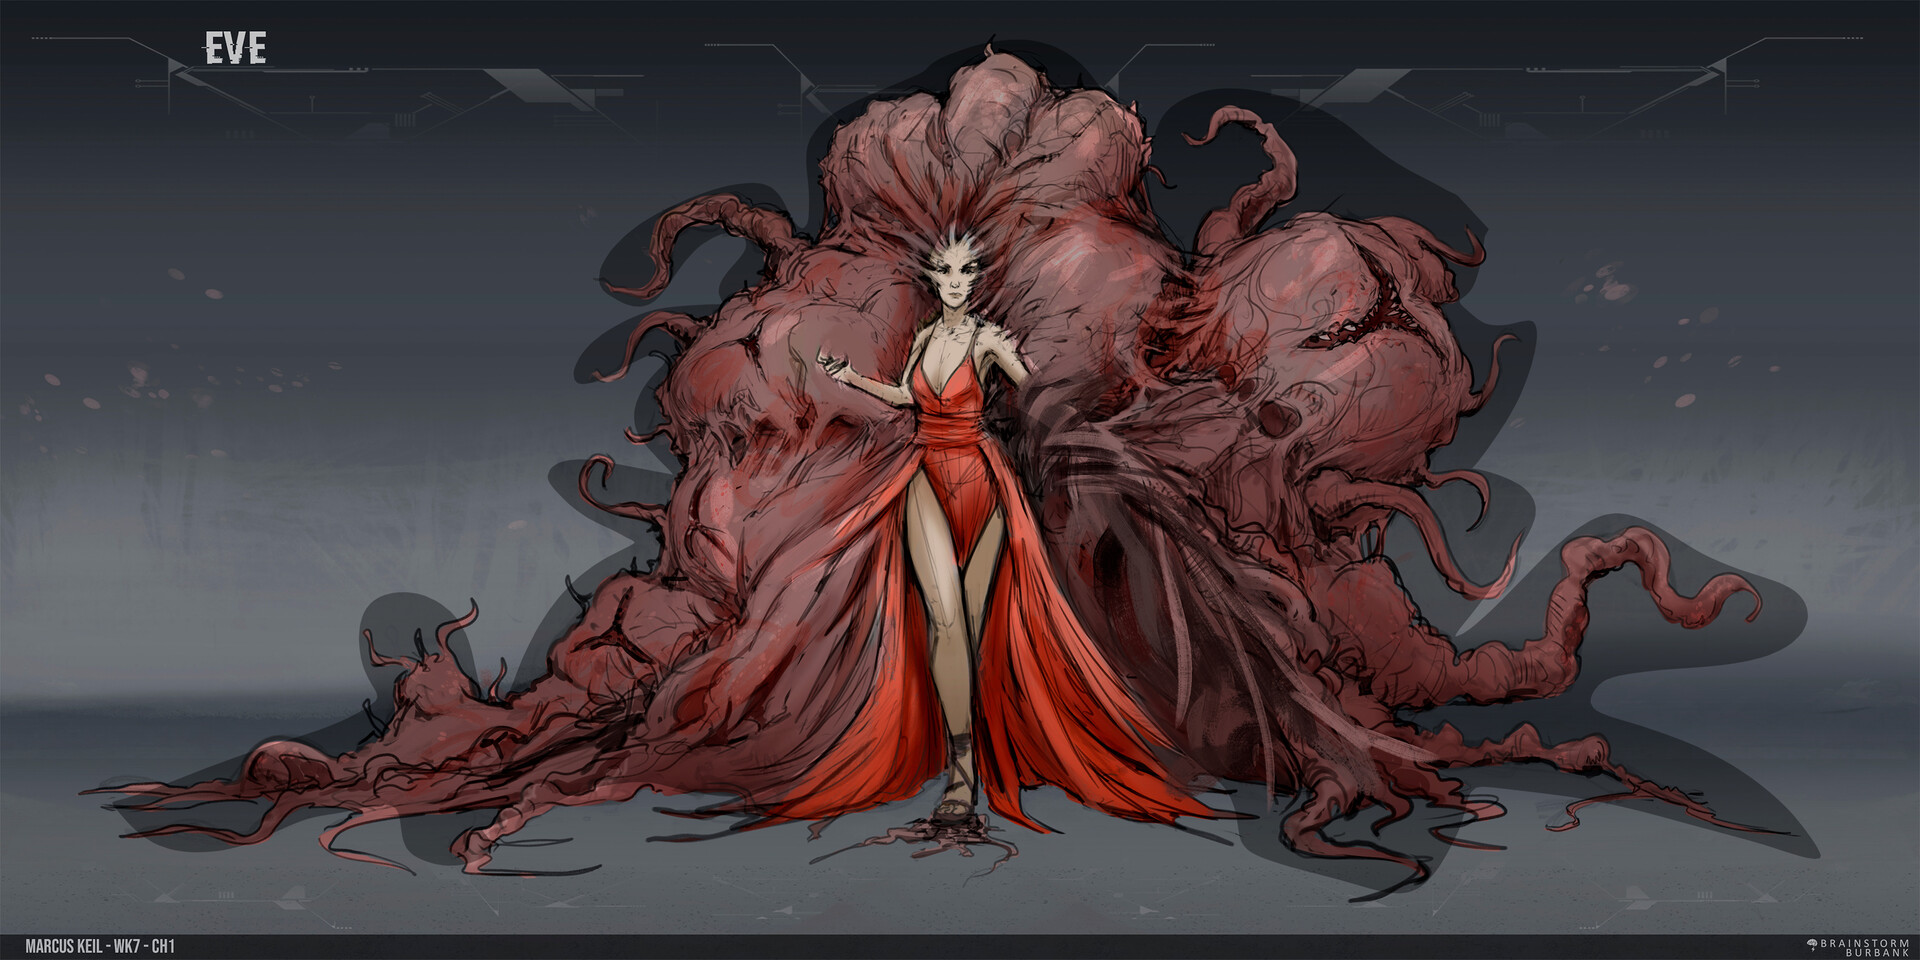 Eve 1st Form - Characters & Art - Parasite Eve  Character art, Concept art  characters, Beast creature